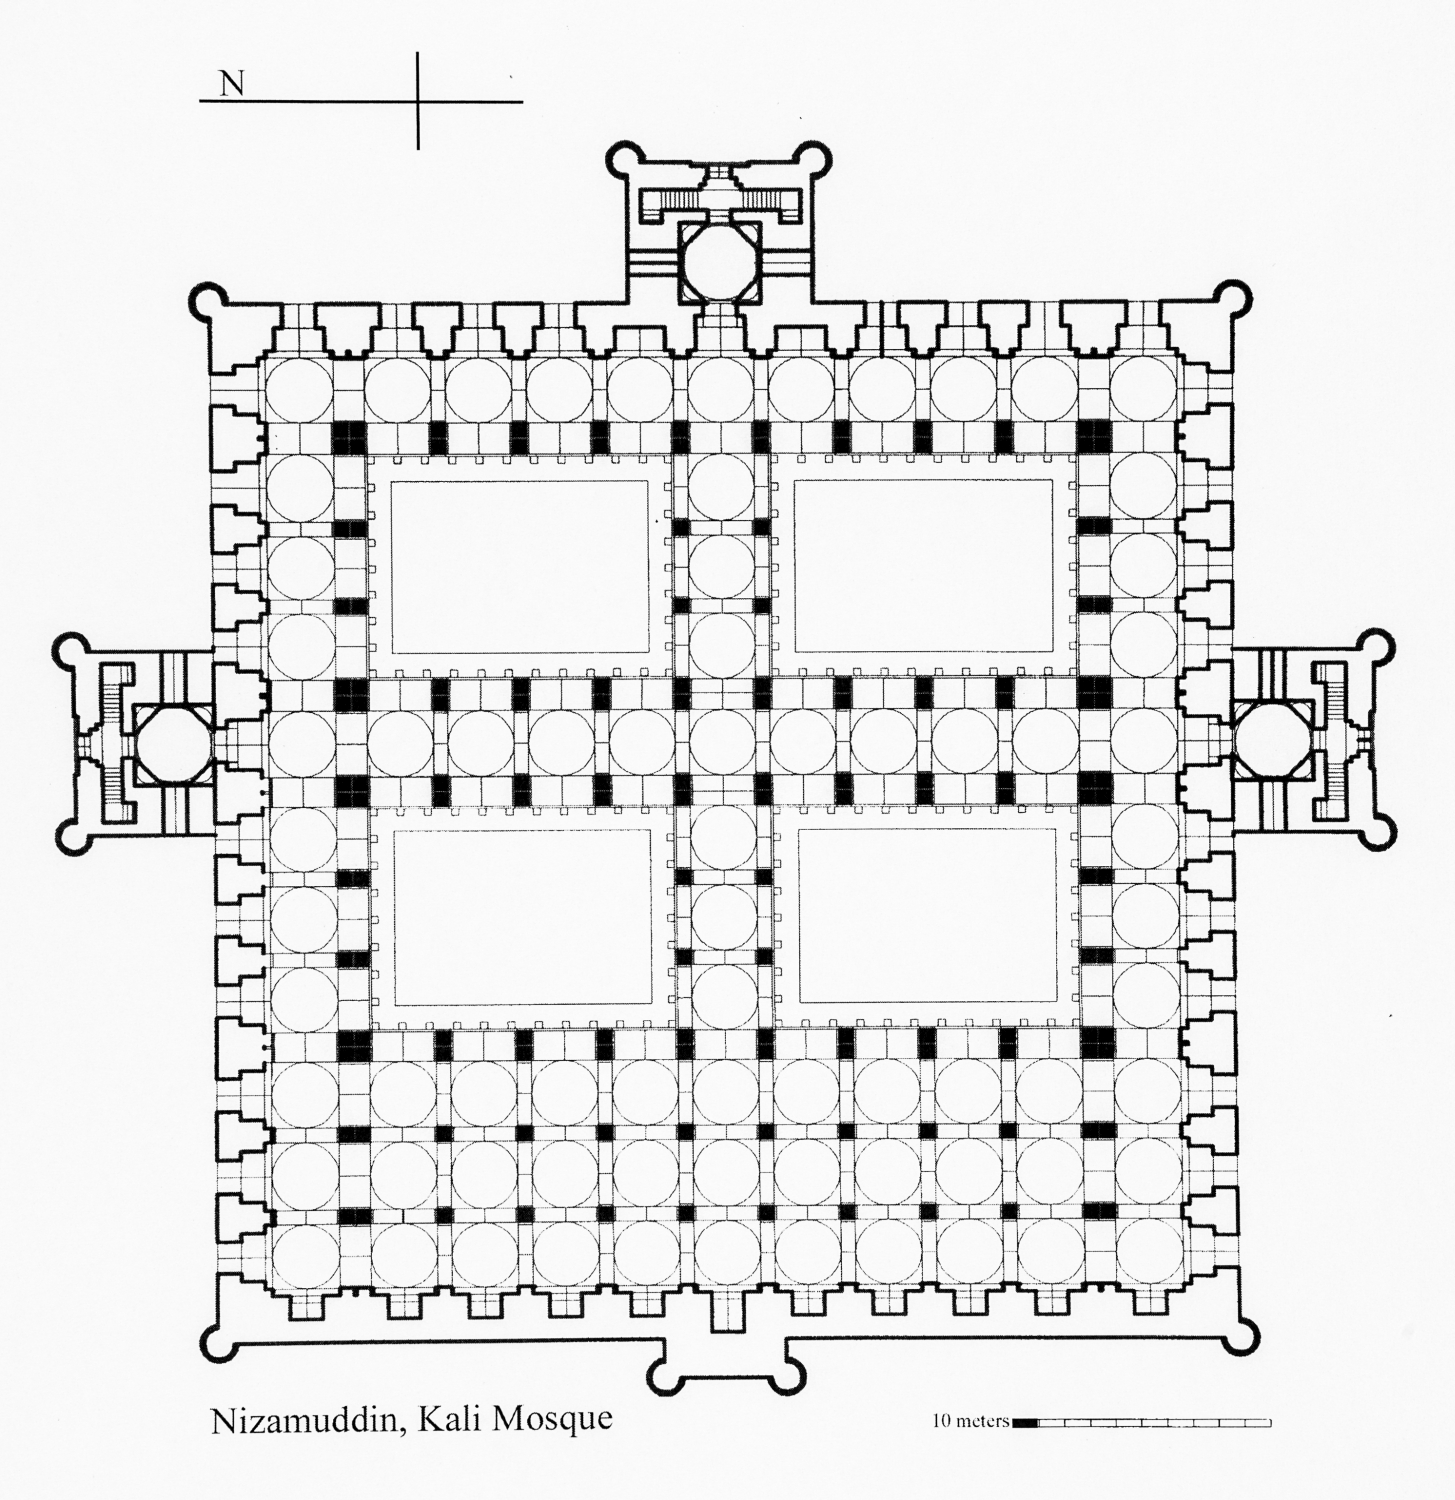 Plan, after the Archaeological Survey of India